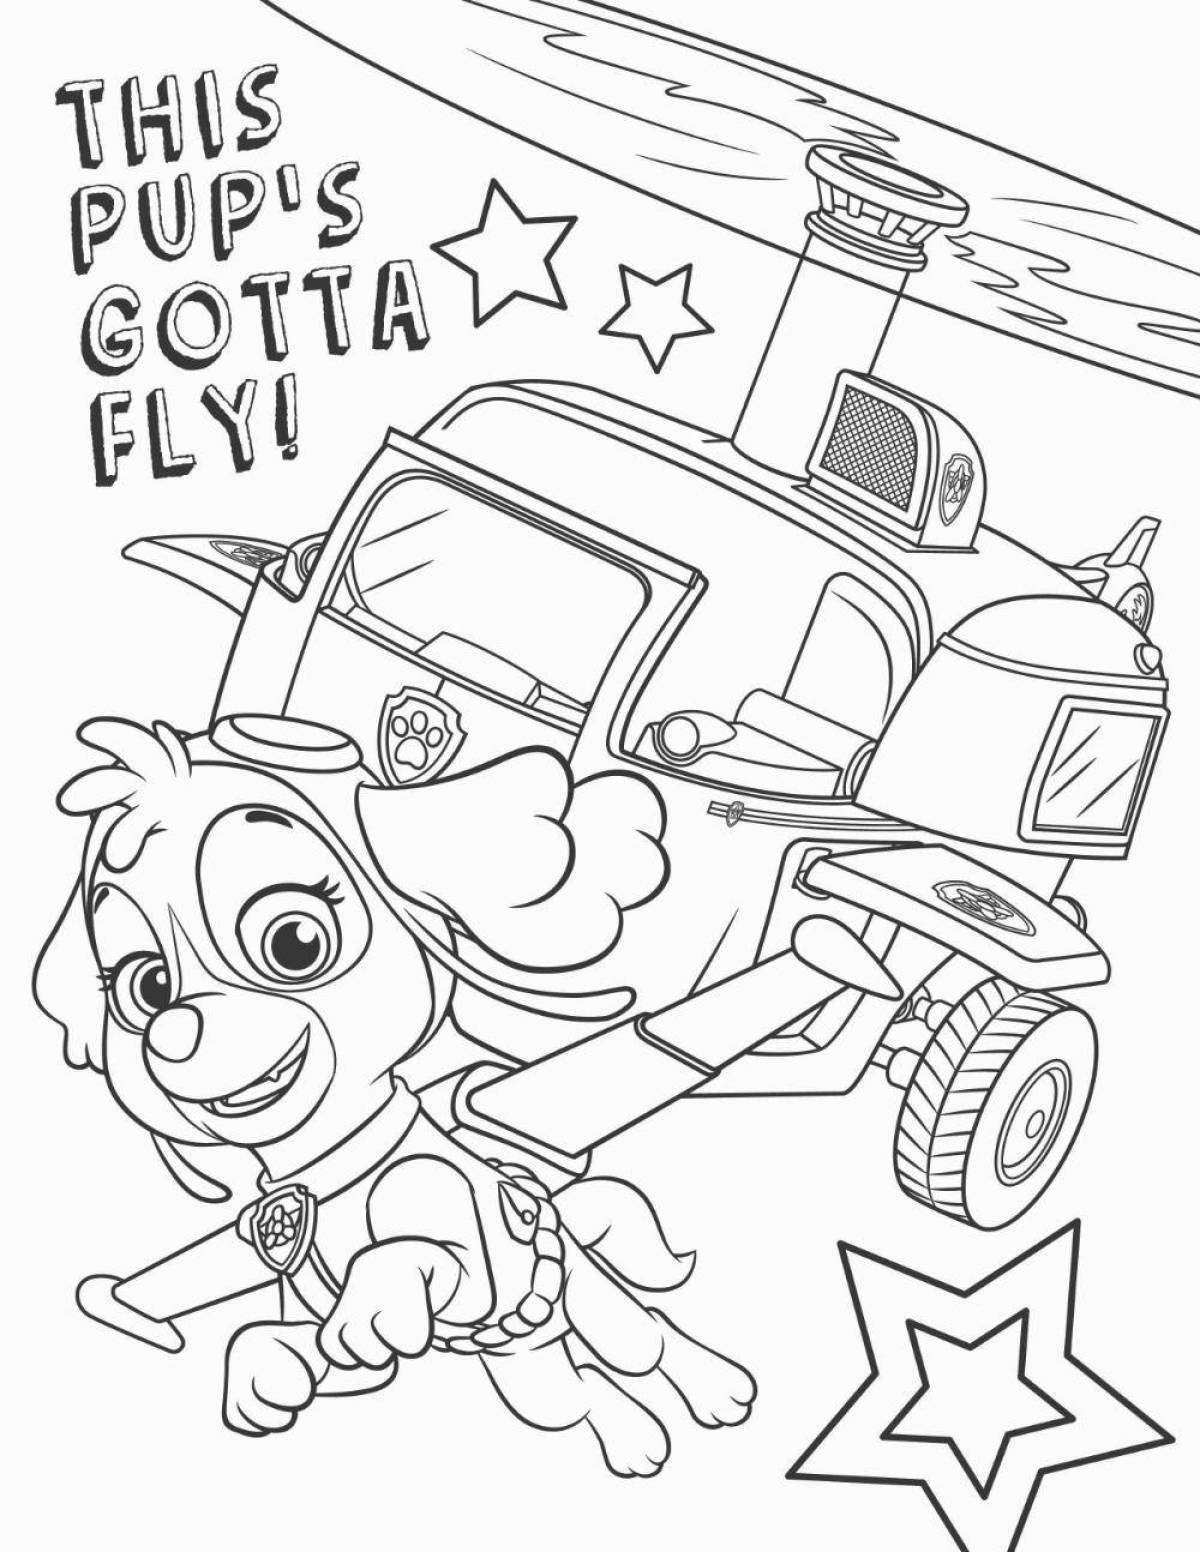 Fairytale Paw Patrol coloring book